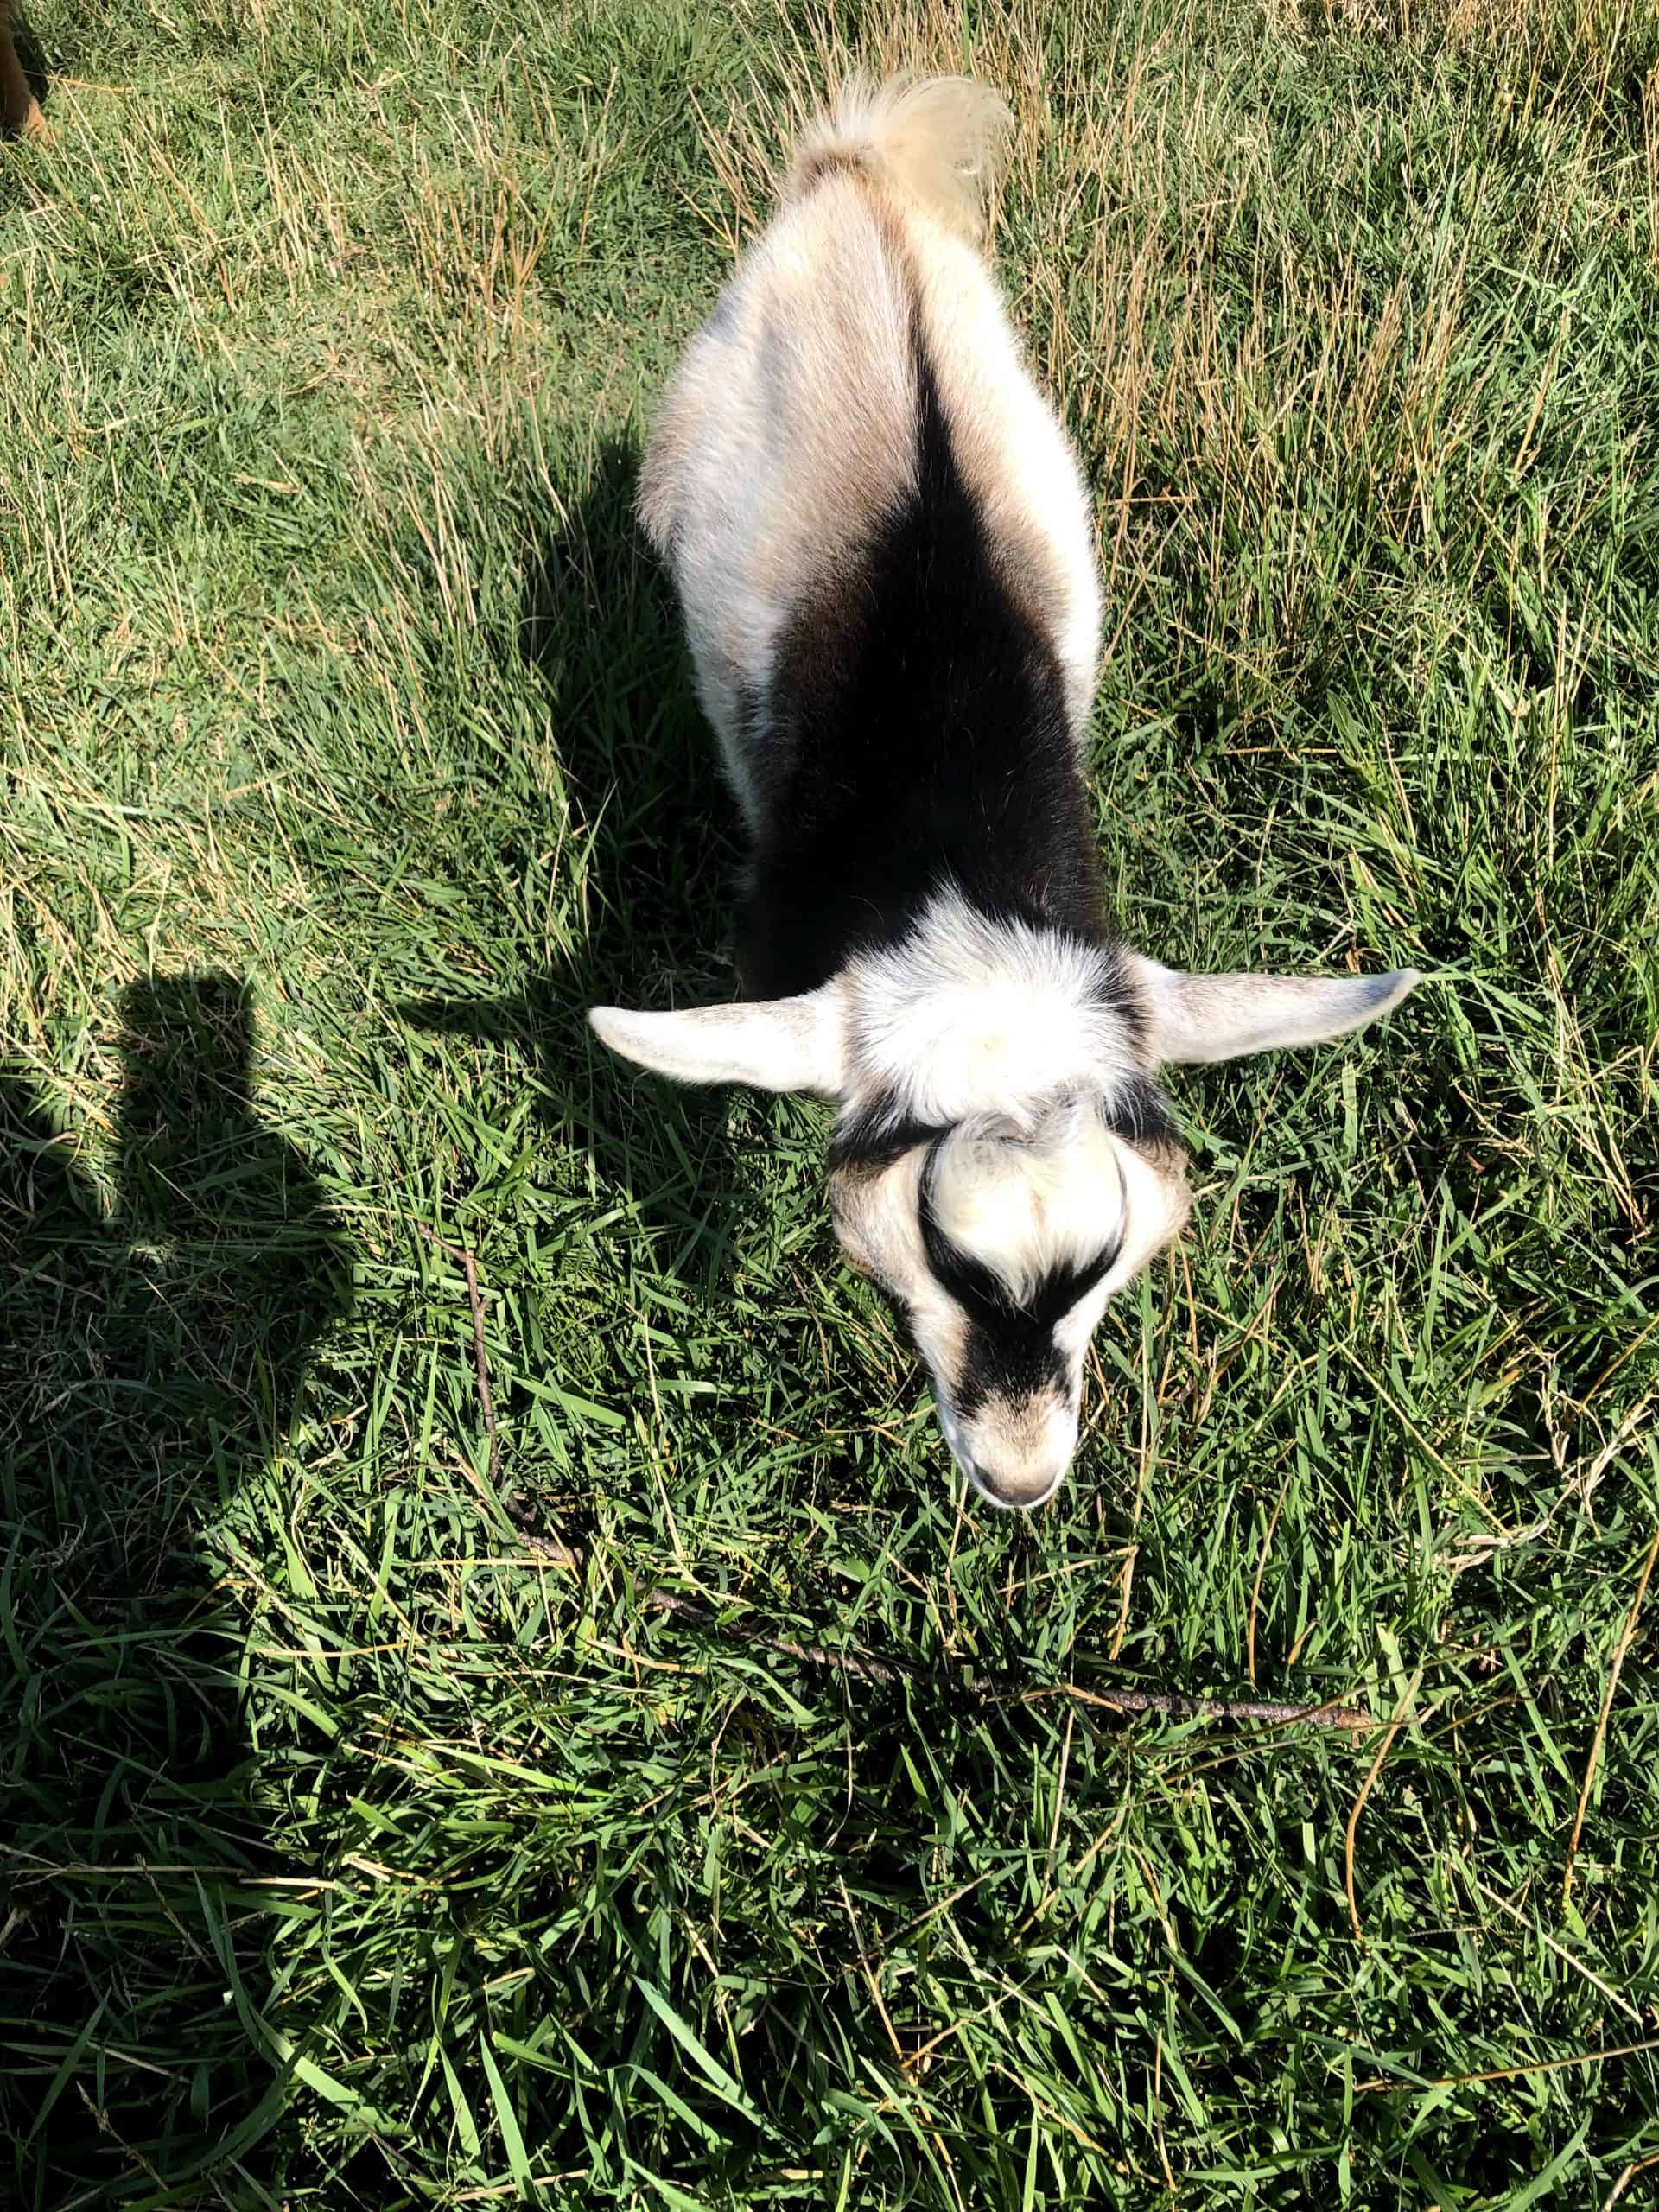 young goat eating grass